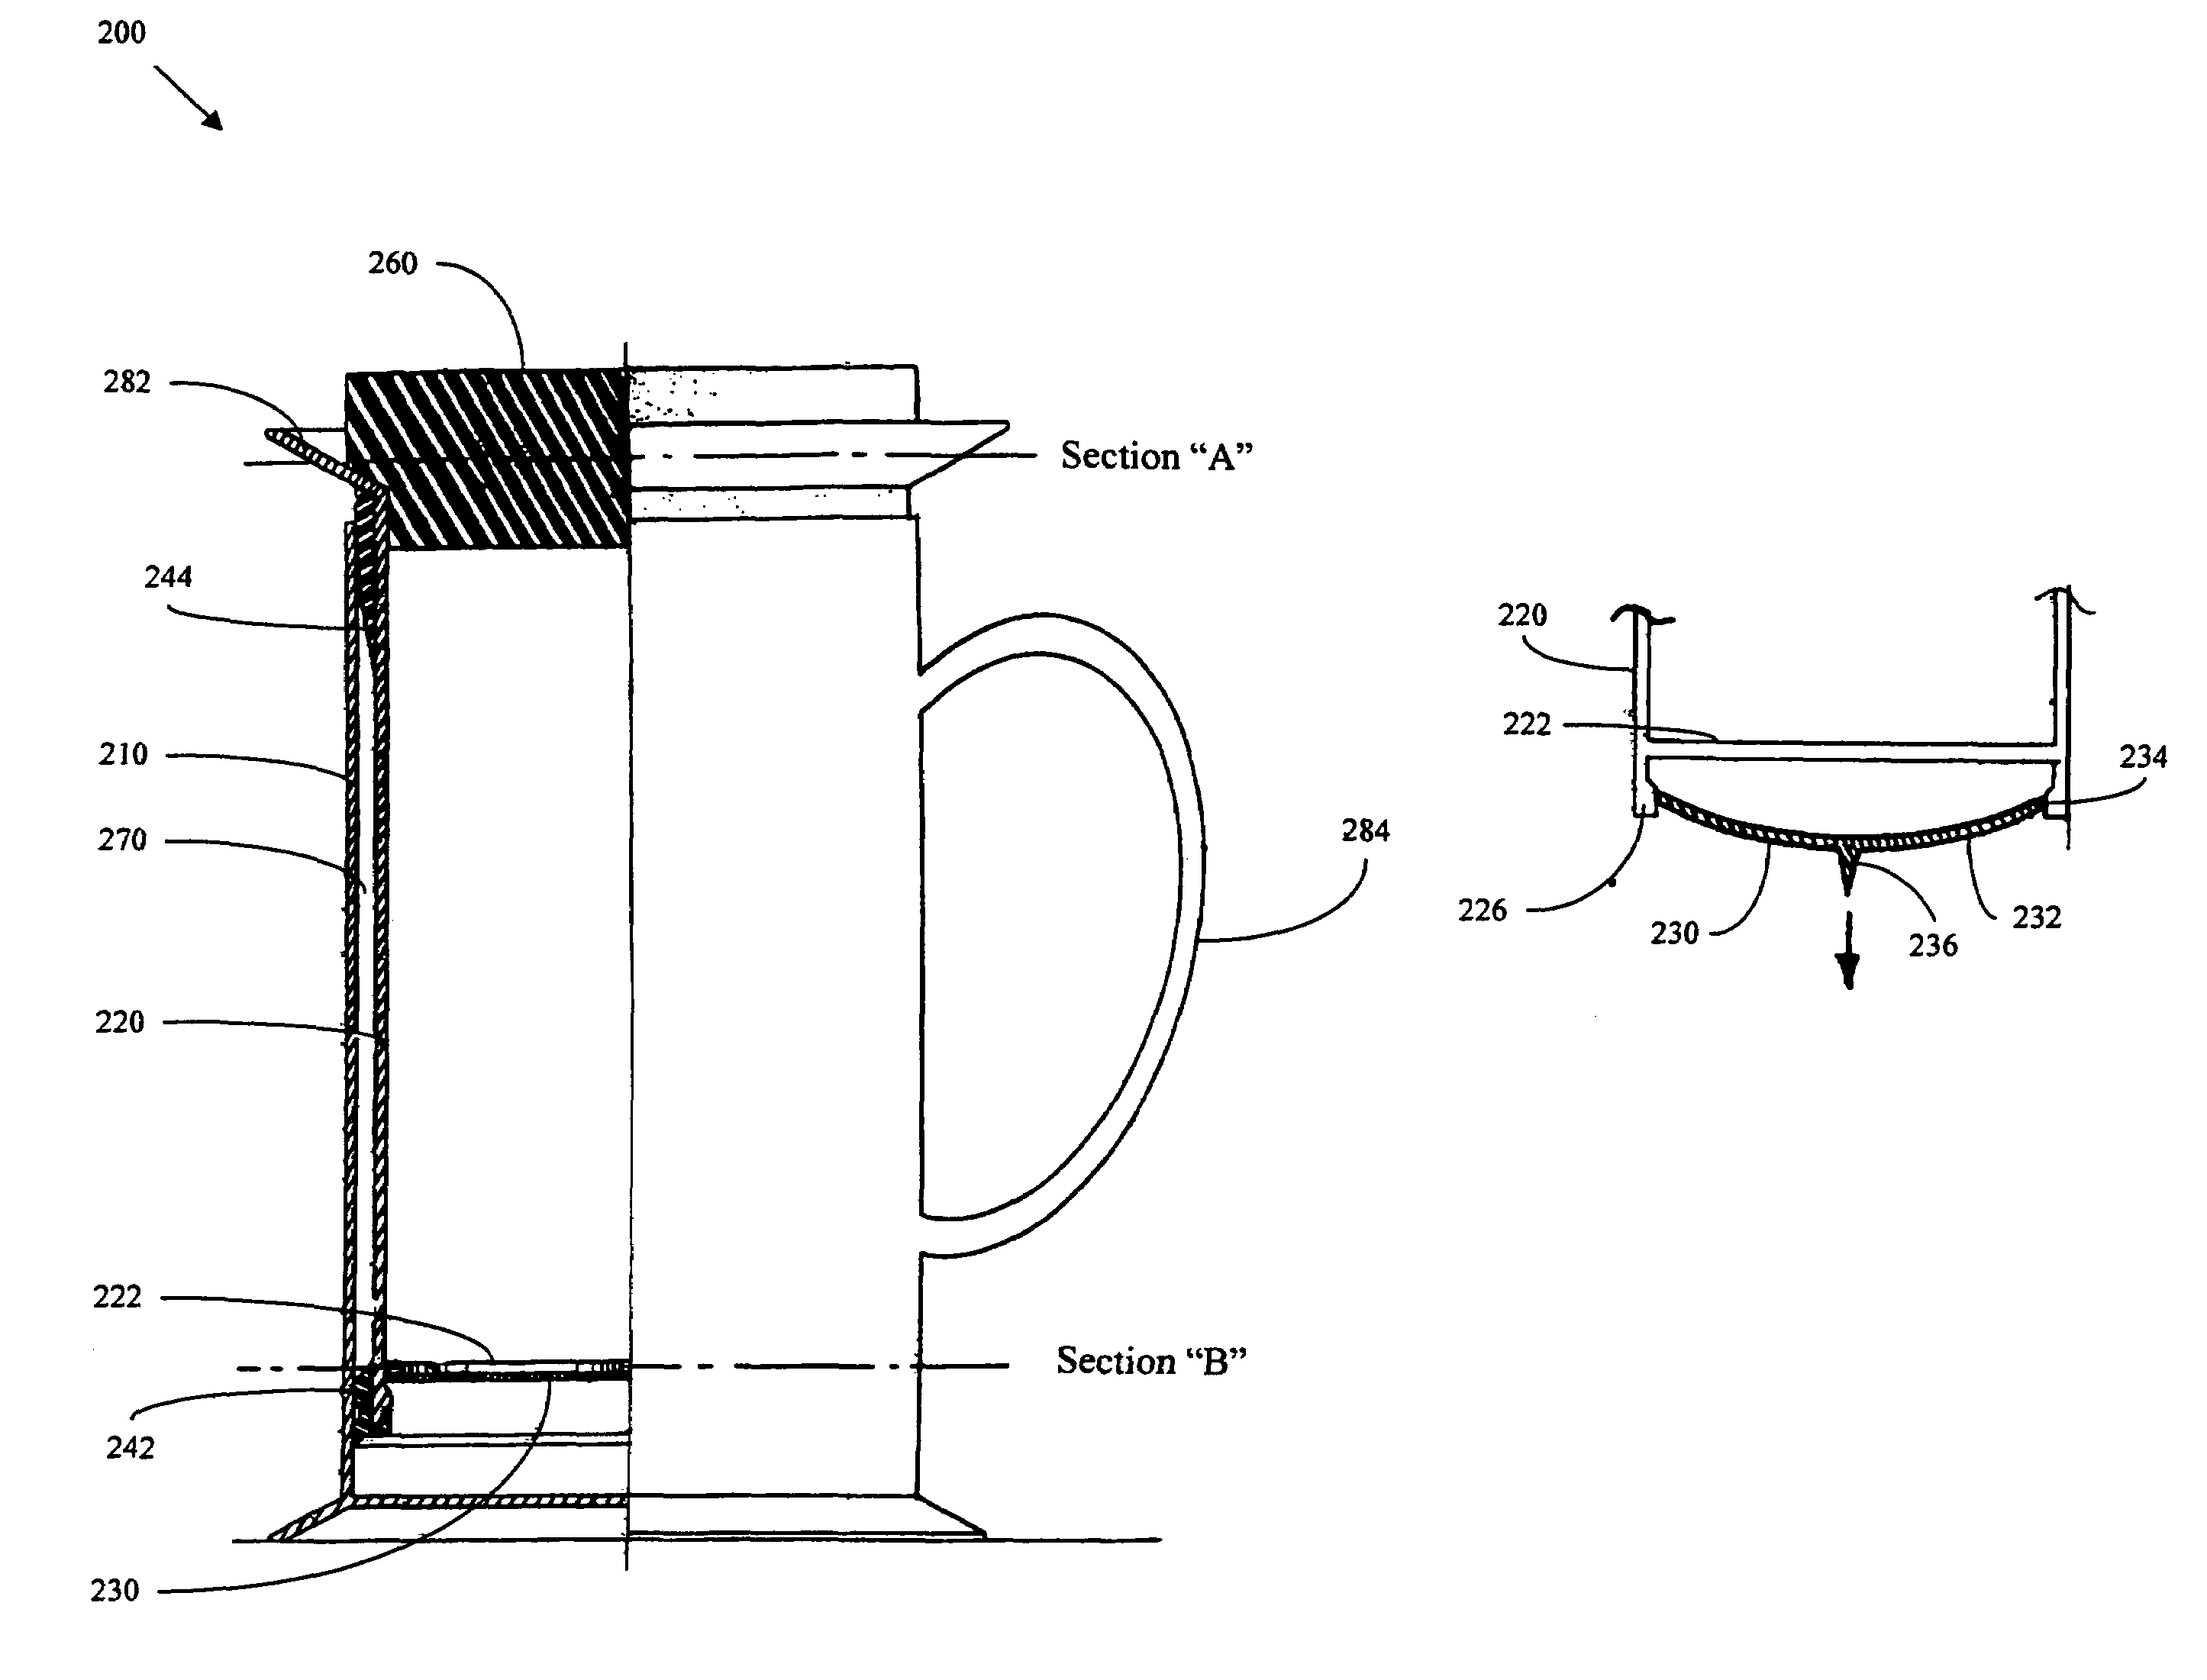 Beverage making devices and methods with an inner housing in place of a central rod plunger